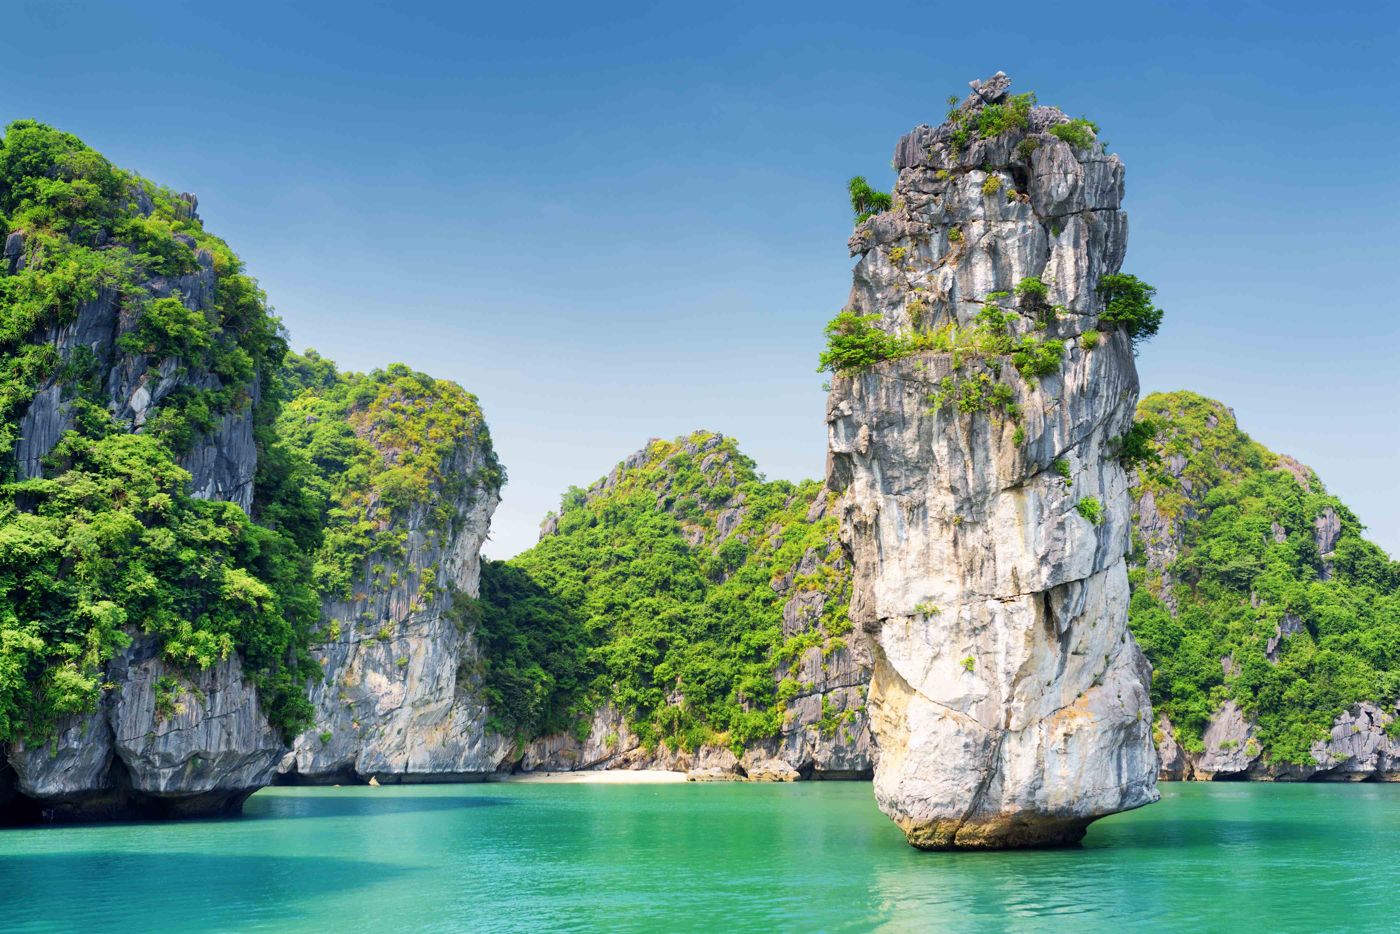 Discovering Ha Long Bay and fall in love with its magnificent sceneries Discovering Ha Long Bay and fall in love with its magnificent sceneries